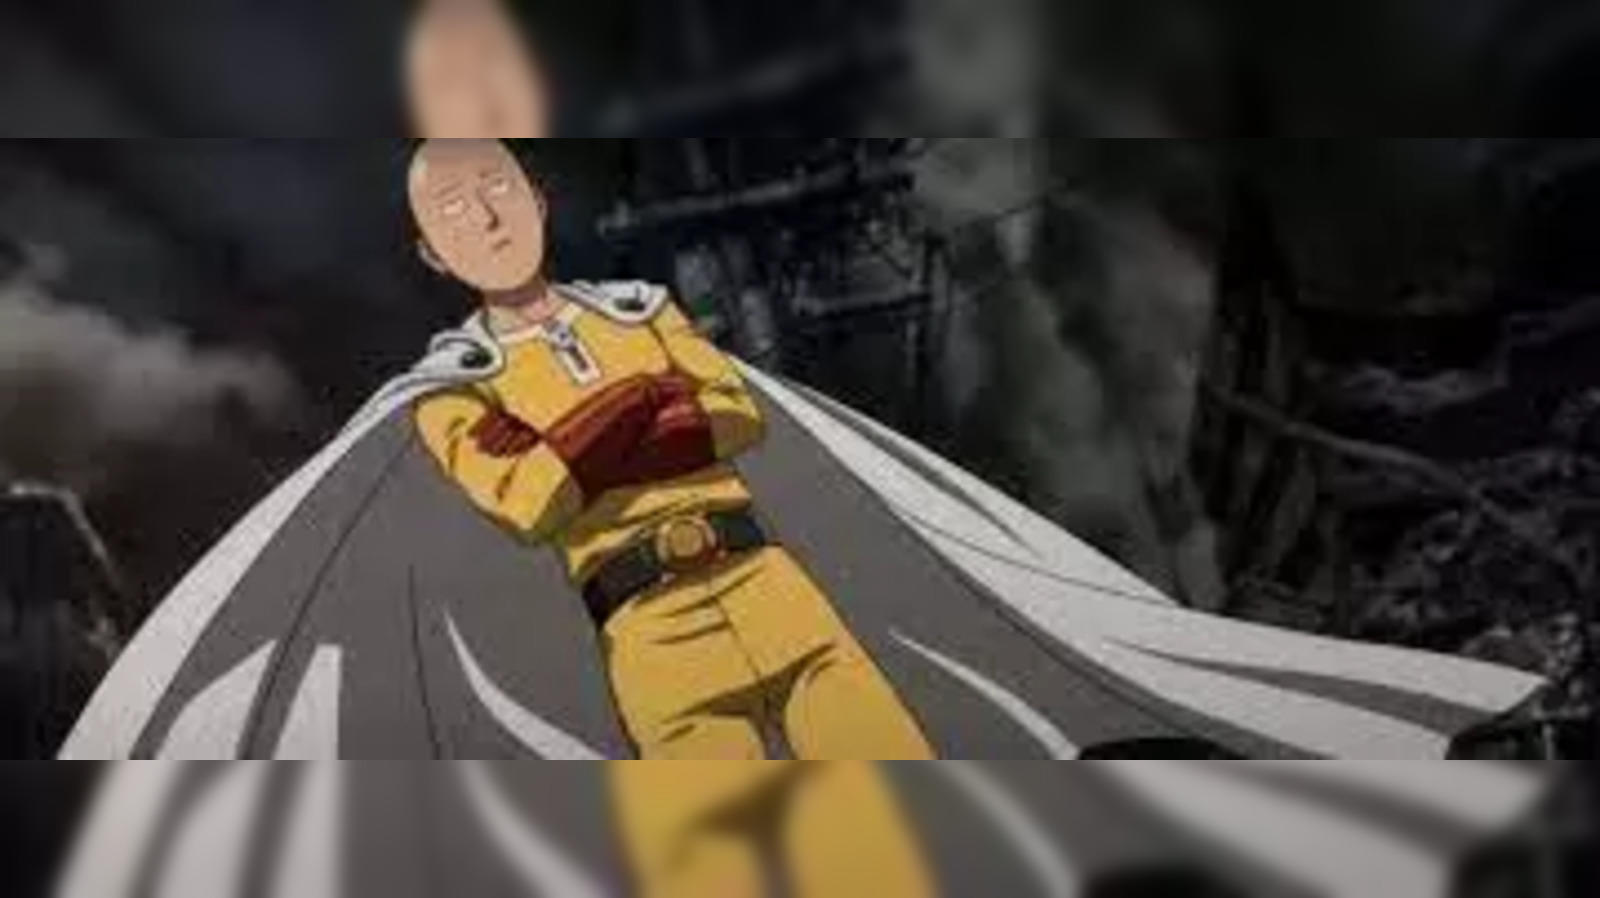 One Punch Man, Daily Anime Art